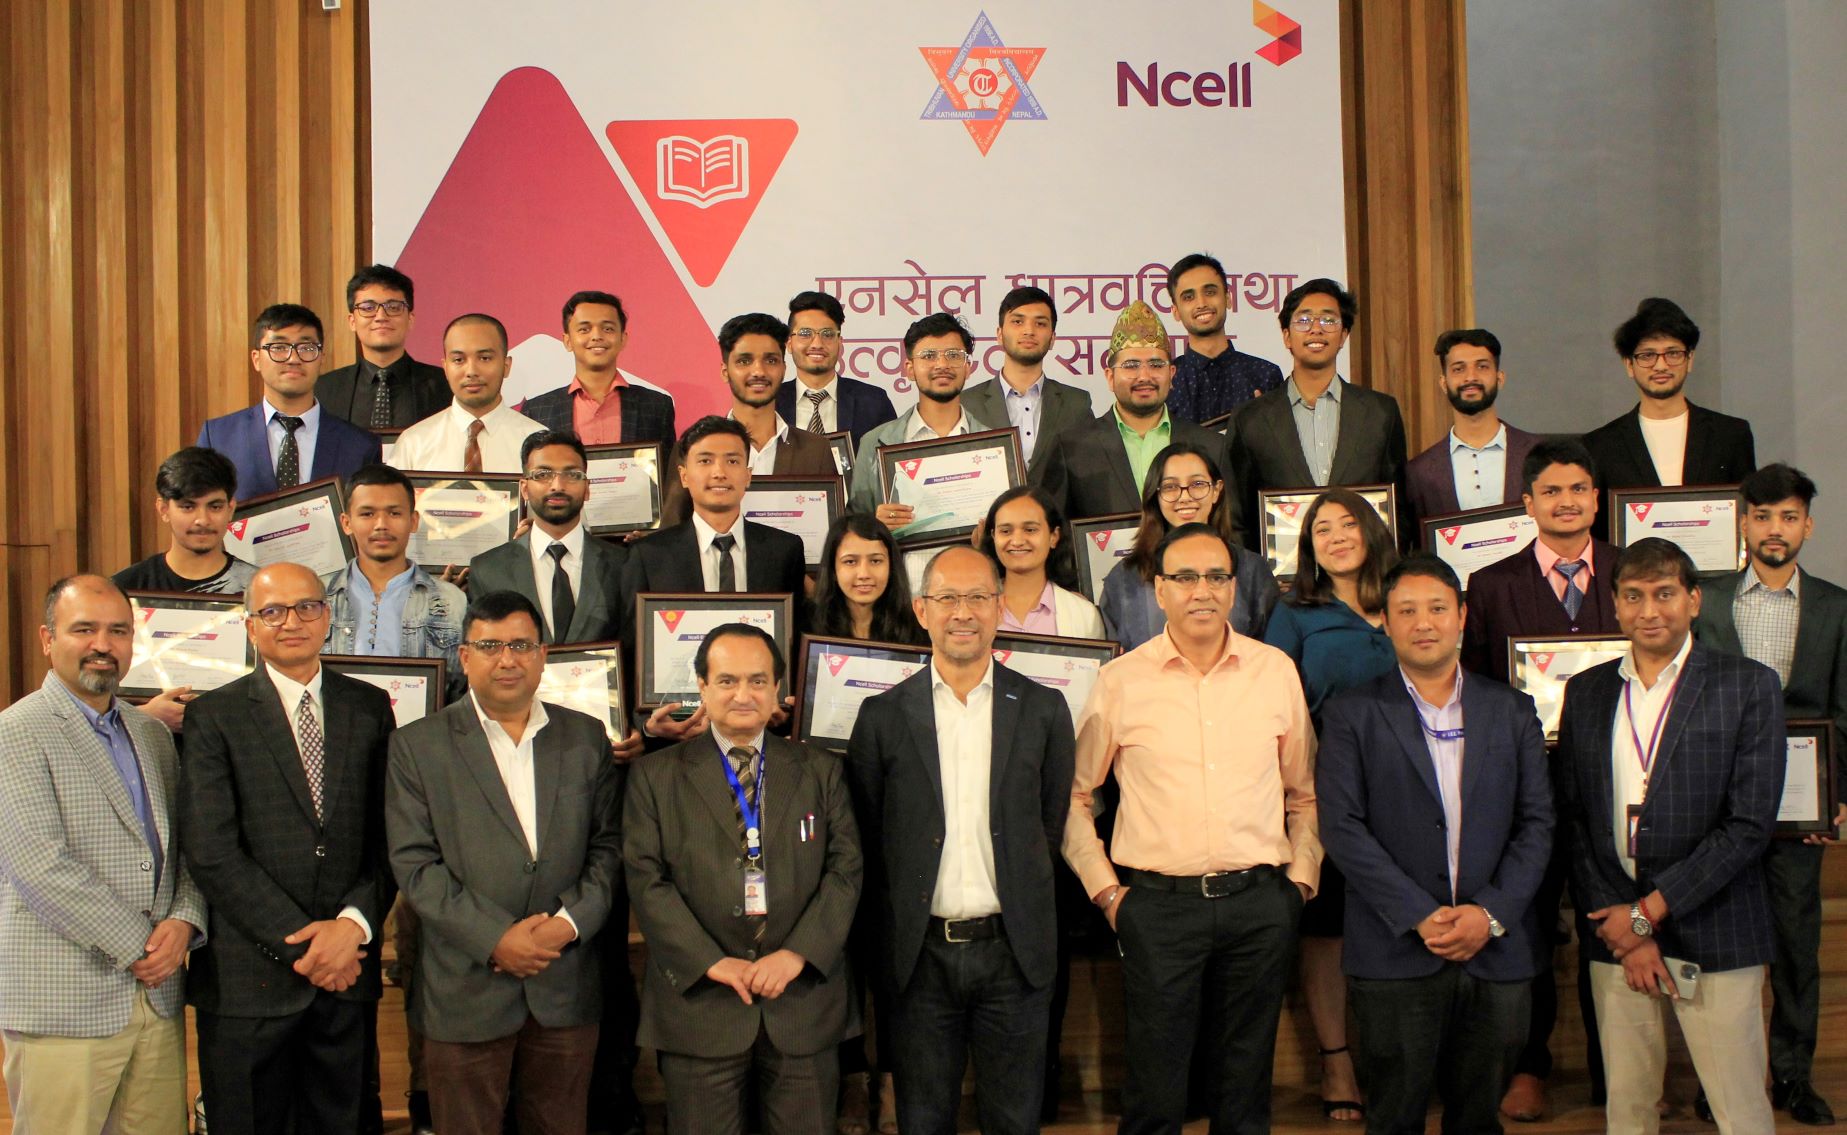 Ncell Scholarship and Excellence Award 2078